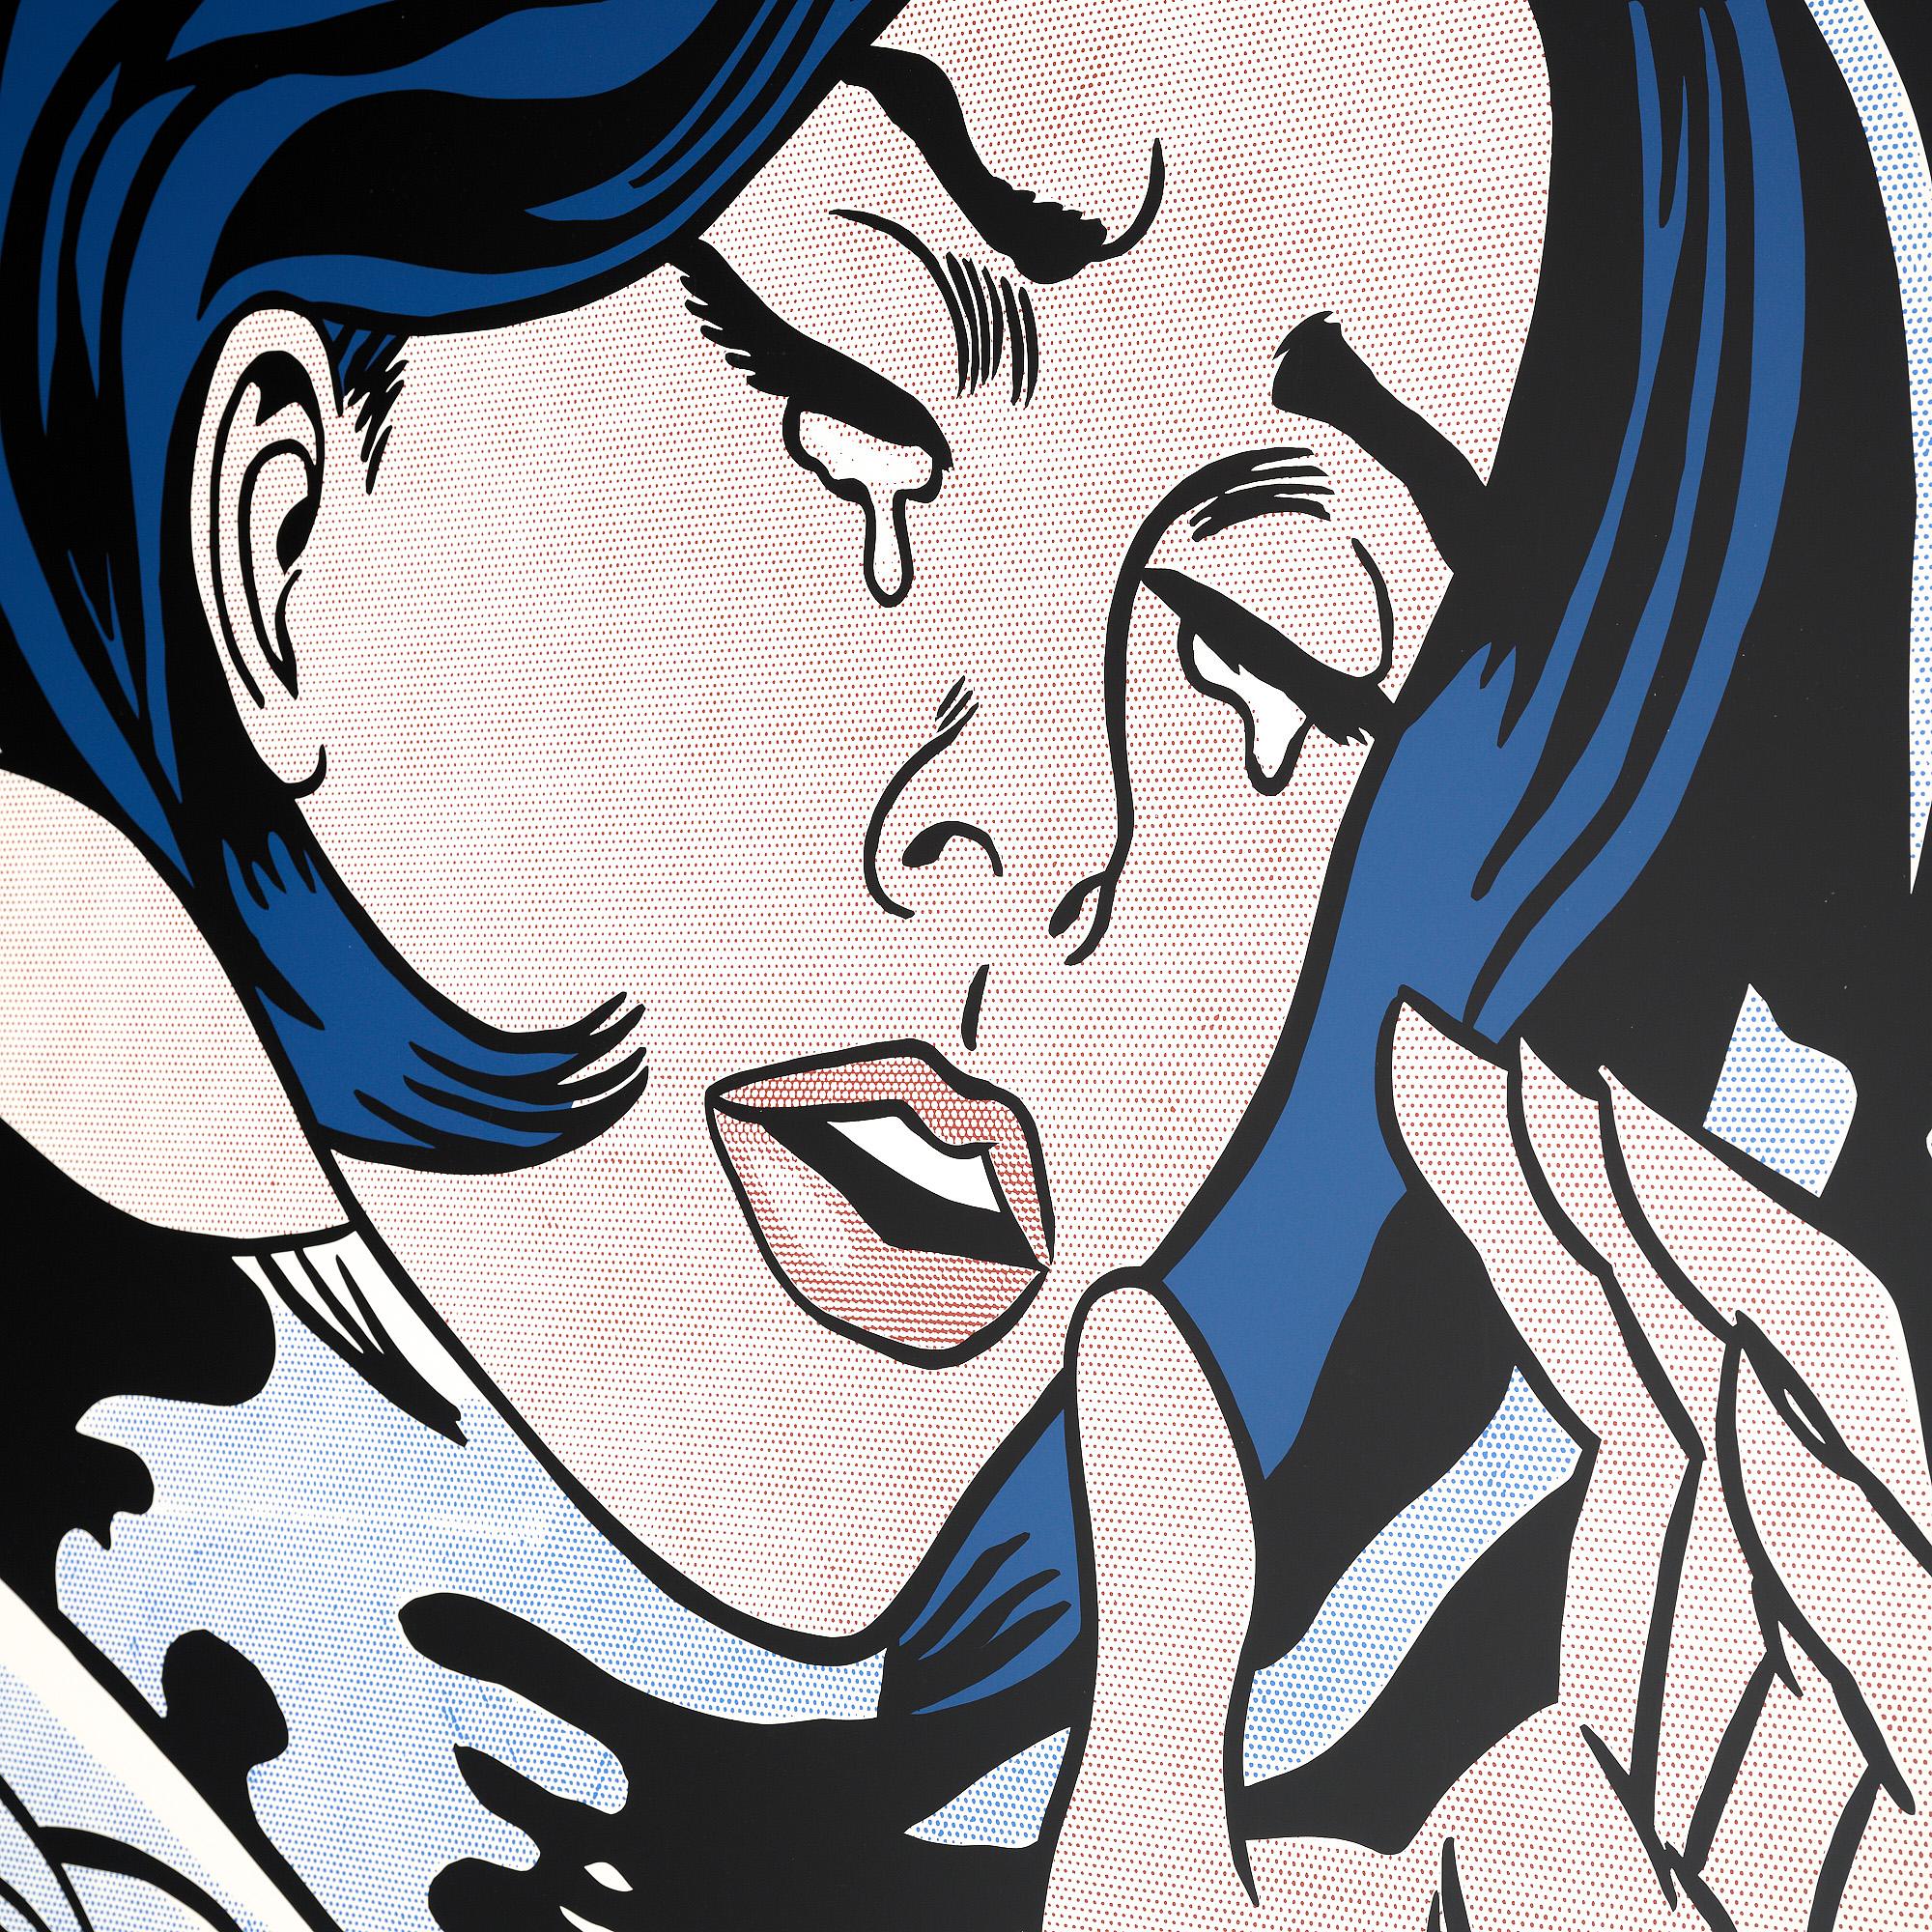 American Roy Lichtenstein “Drowning Girl” New York MoMA Print For Sale